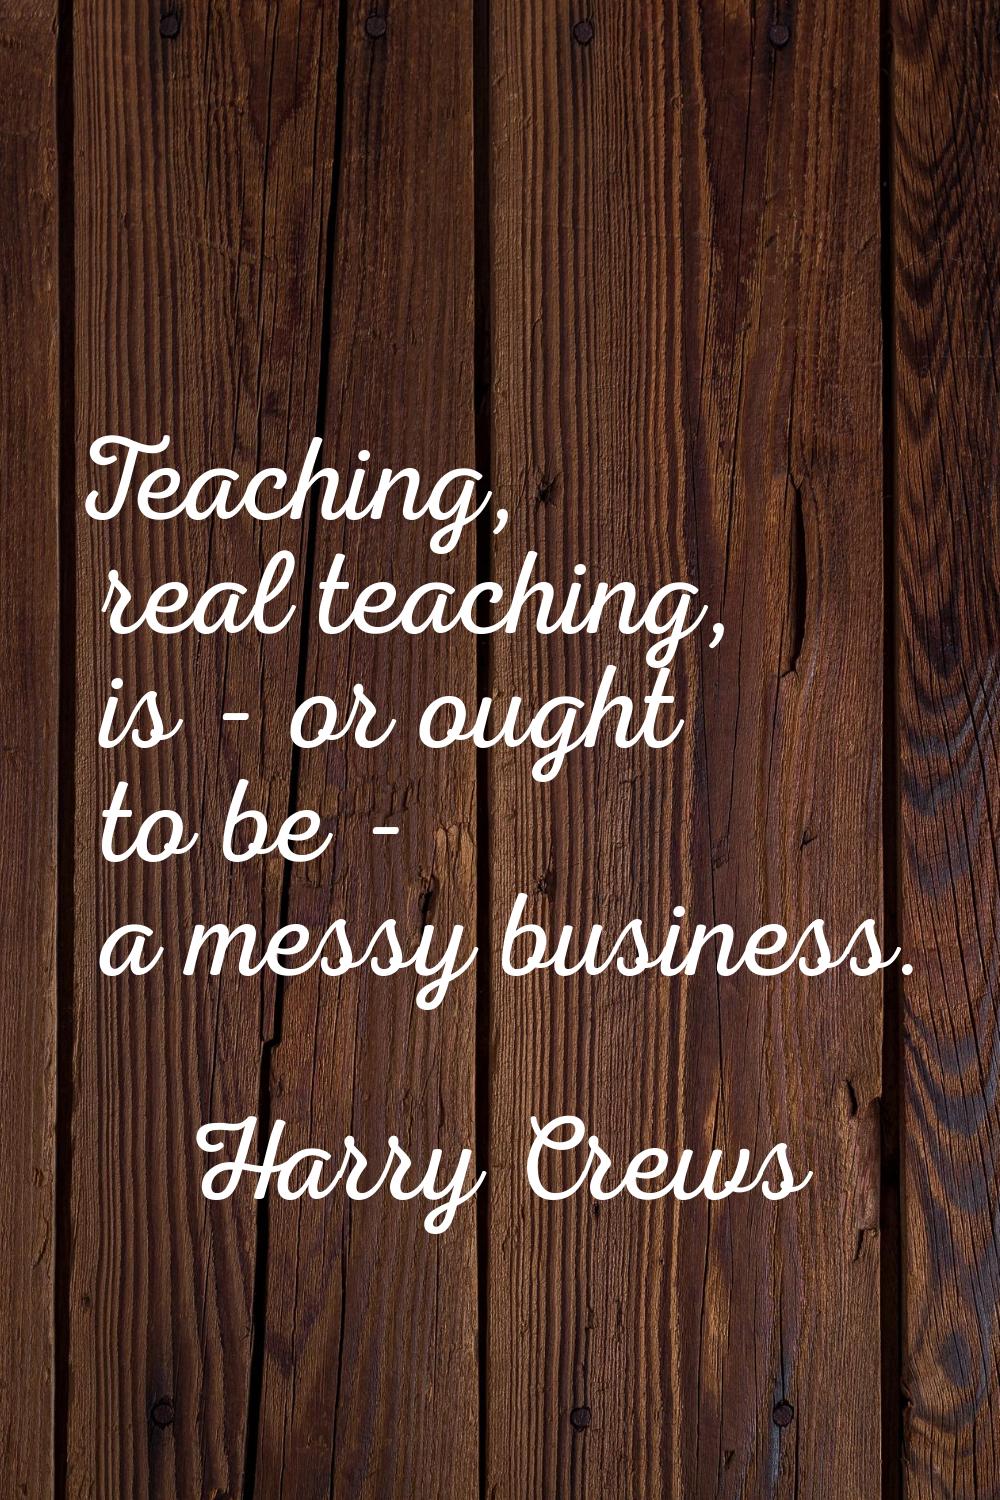 Teaching, real teaching, is - or ought to be - a messy business.